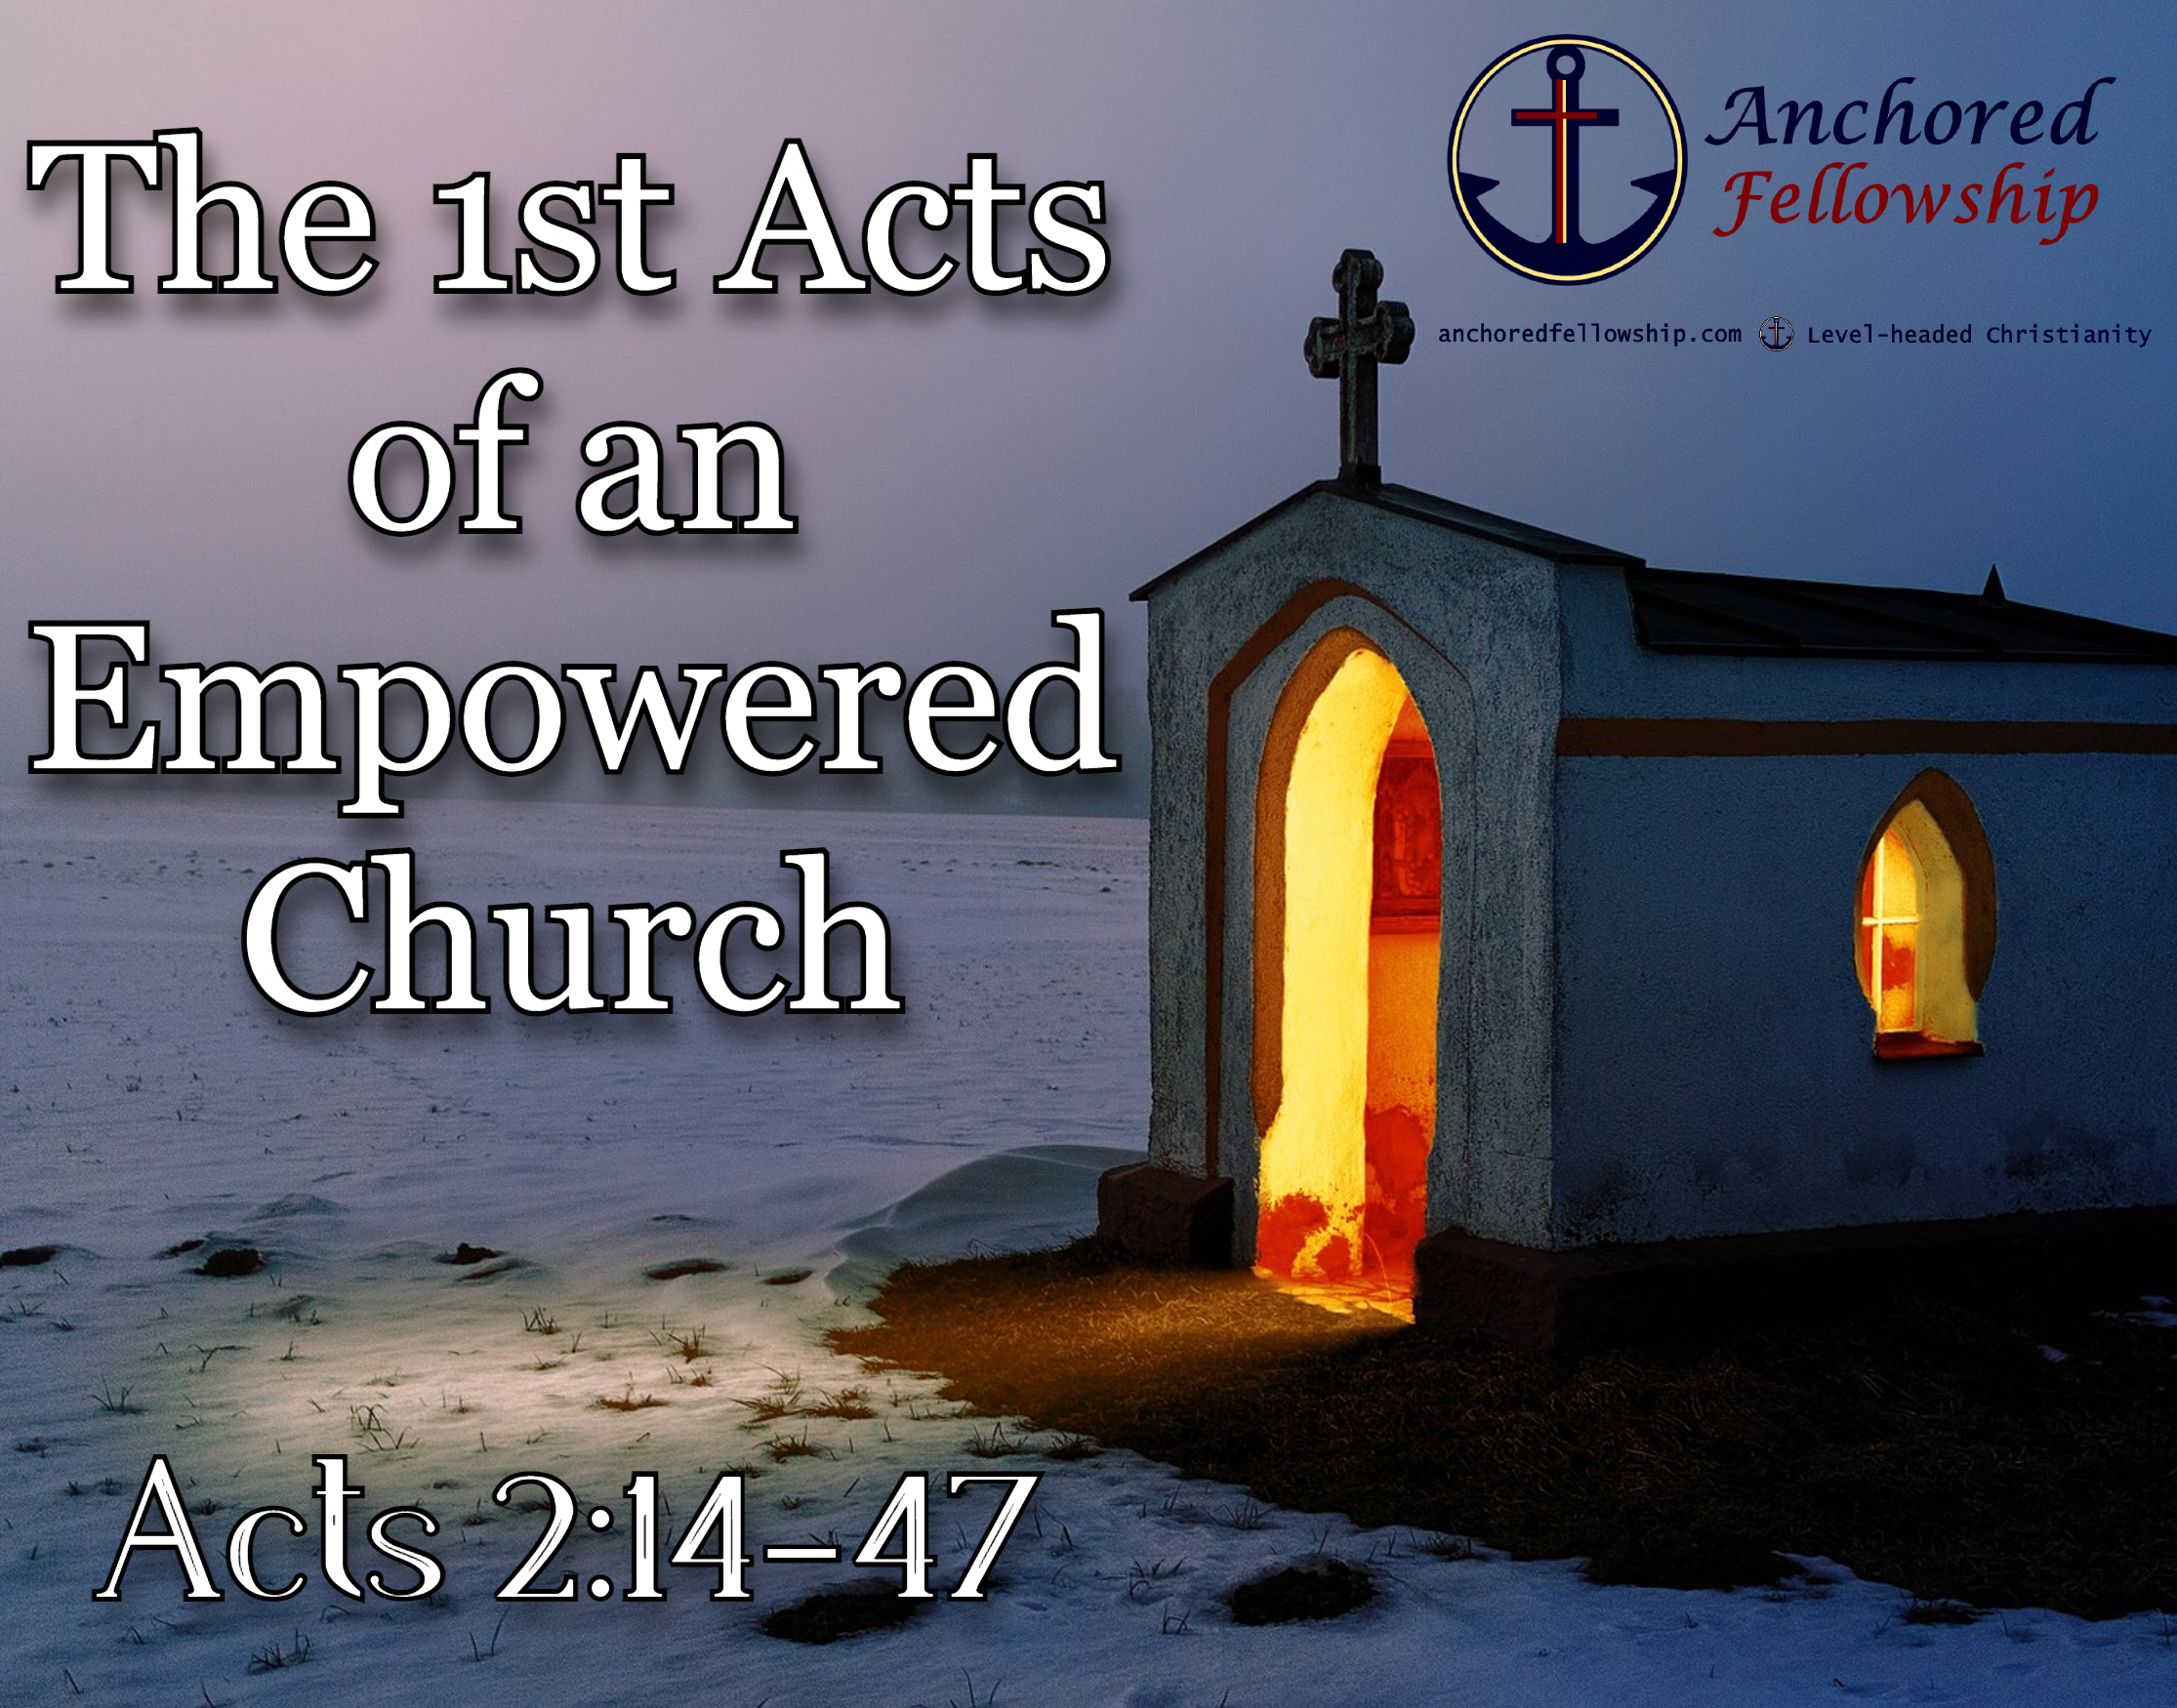 The 1st Acts of an Empowered Church